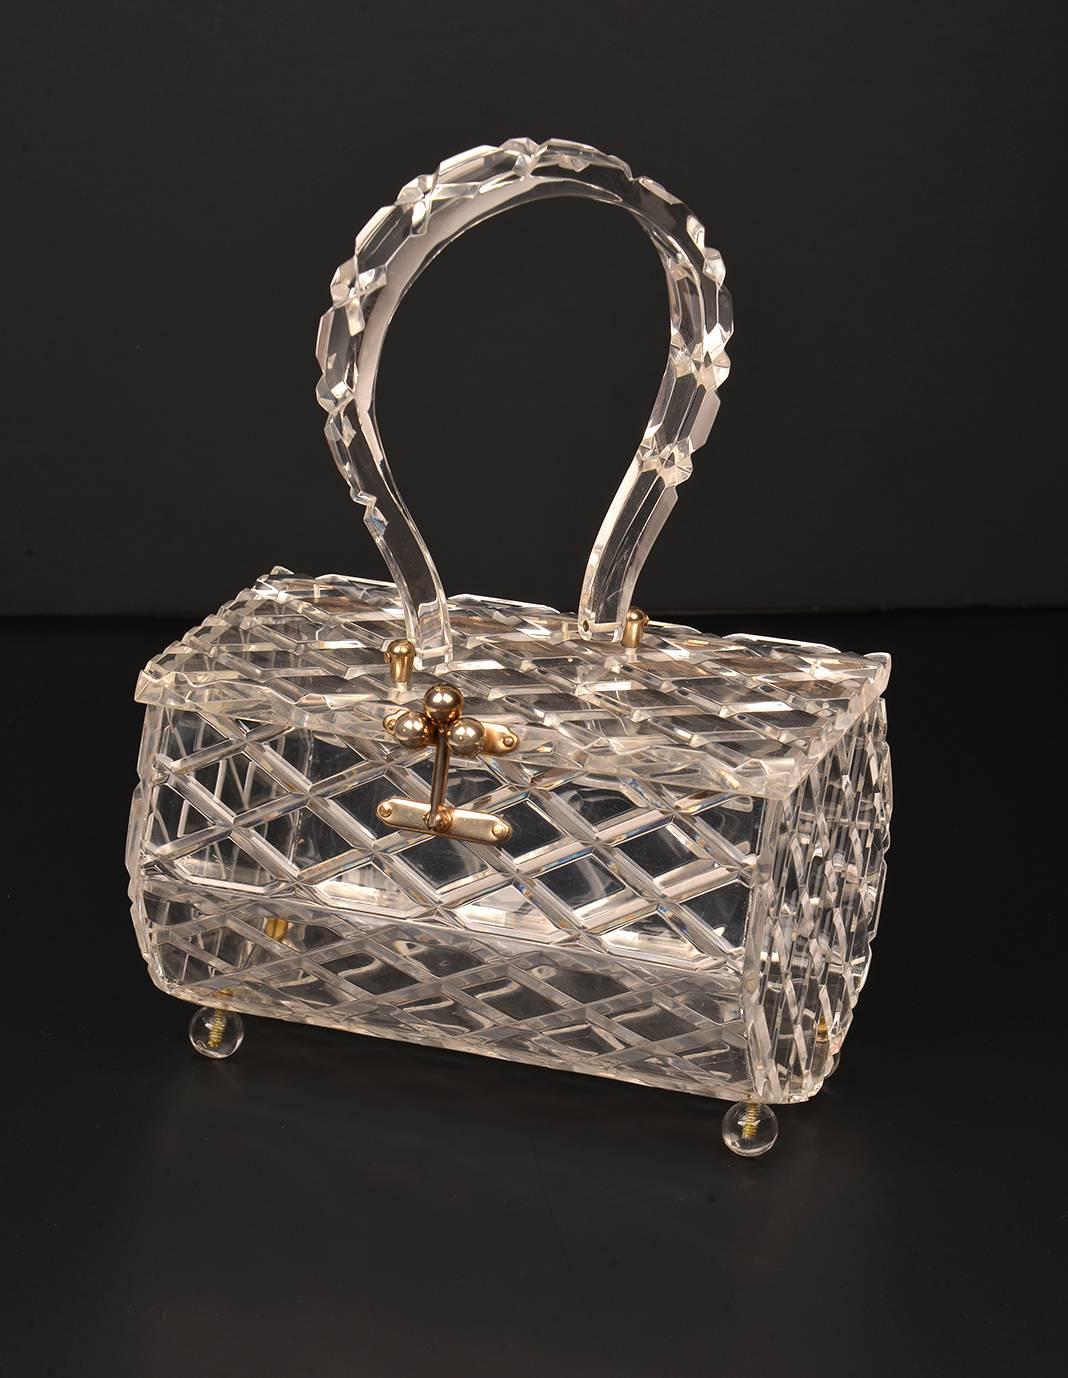 Exquisite crystal clear 1950s Lucite top handle evening bag. The handbag features a crisp molded diamond lattice quilted pattern on the body, handle, and lid. The body of the purse is an elongated 7-sided heptagonal cylinder, and is supported on the